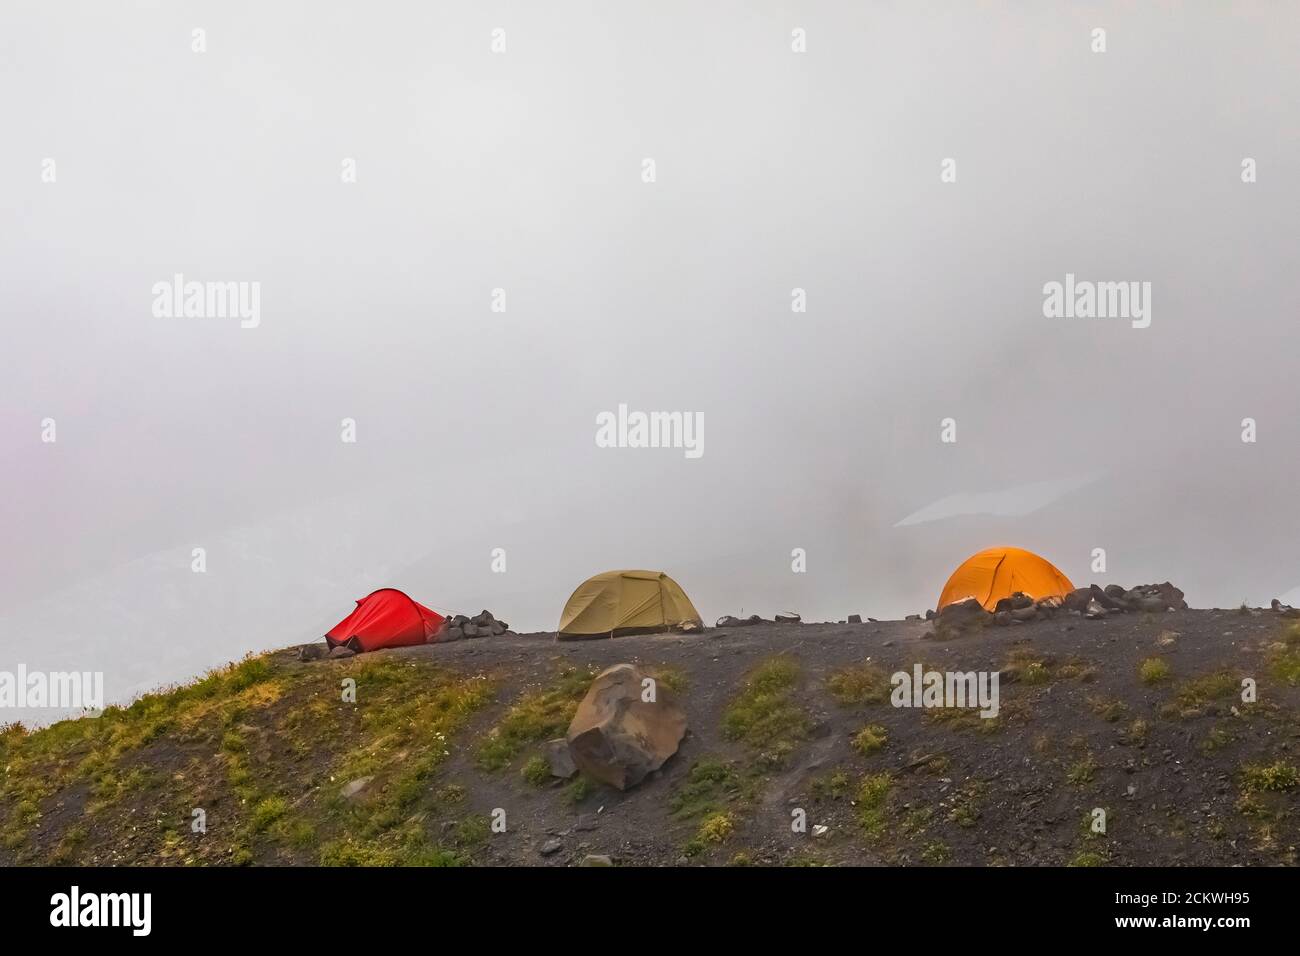 Tentsite used by climbers and backpackers in Hogsback Camp on Heliotrope Ridge below Mount Baker, Mount Baker-Snoqualmie National Forest, Washington S Stock Photo